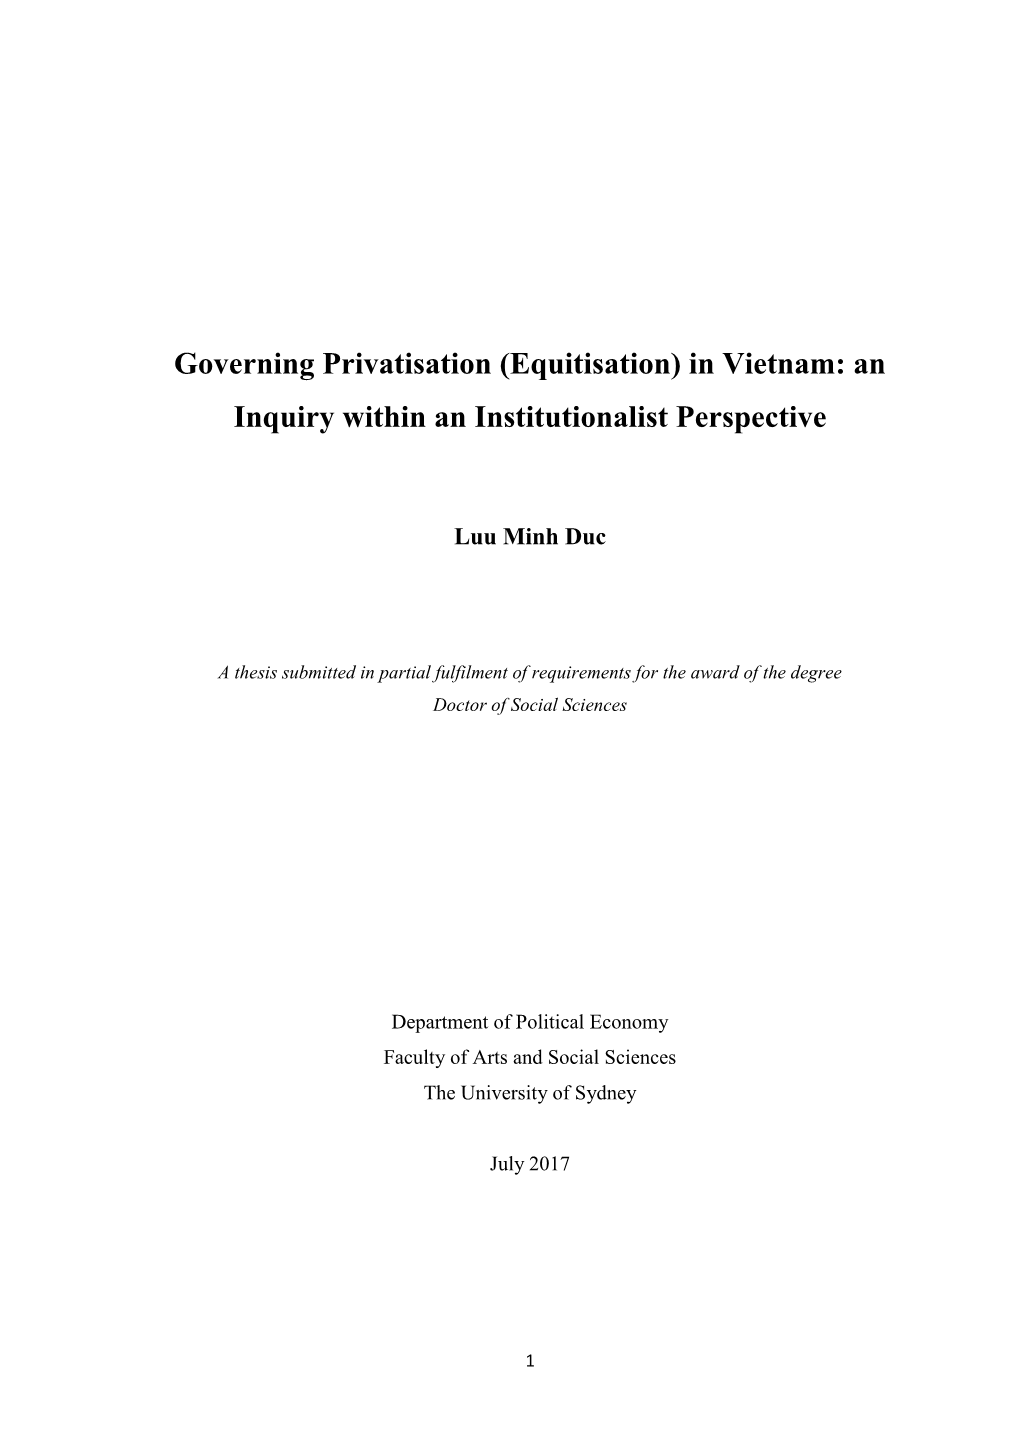 Governing Privatisation (Equitisation) in Vietnam: an Inquiry Within an Institutionalist Perspective